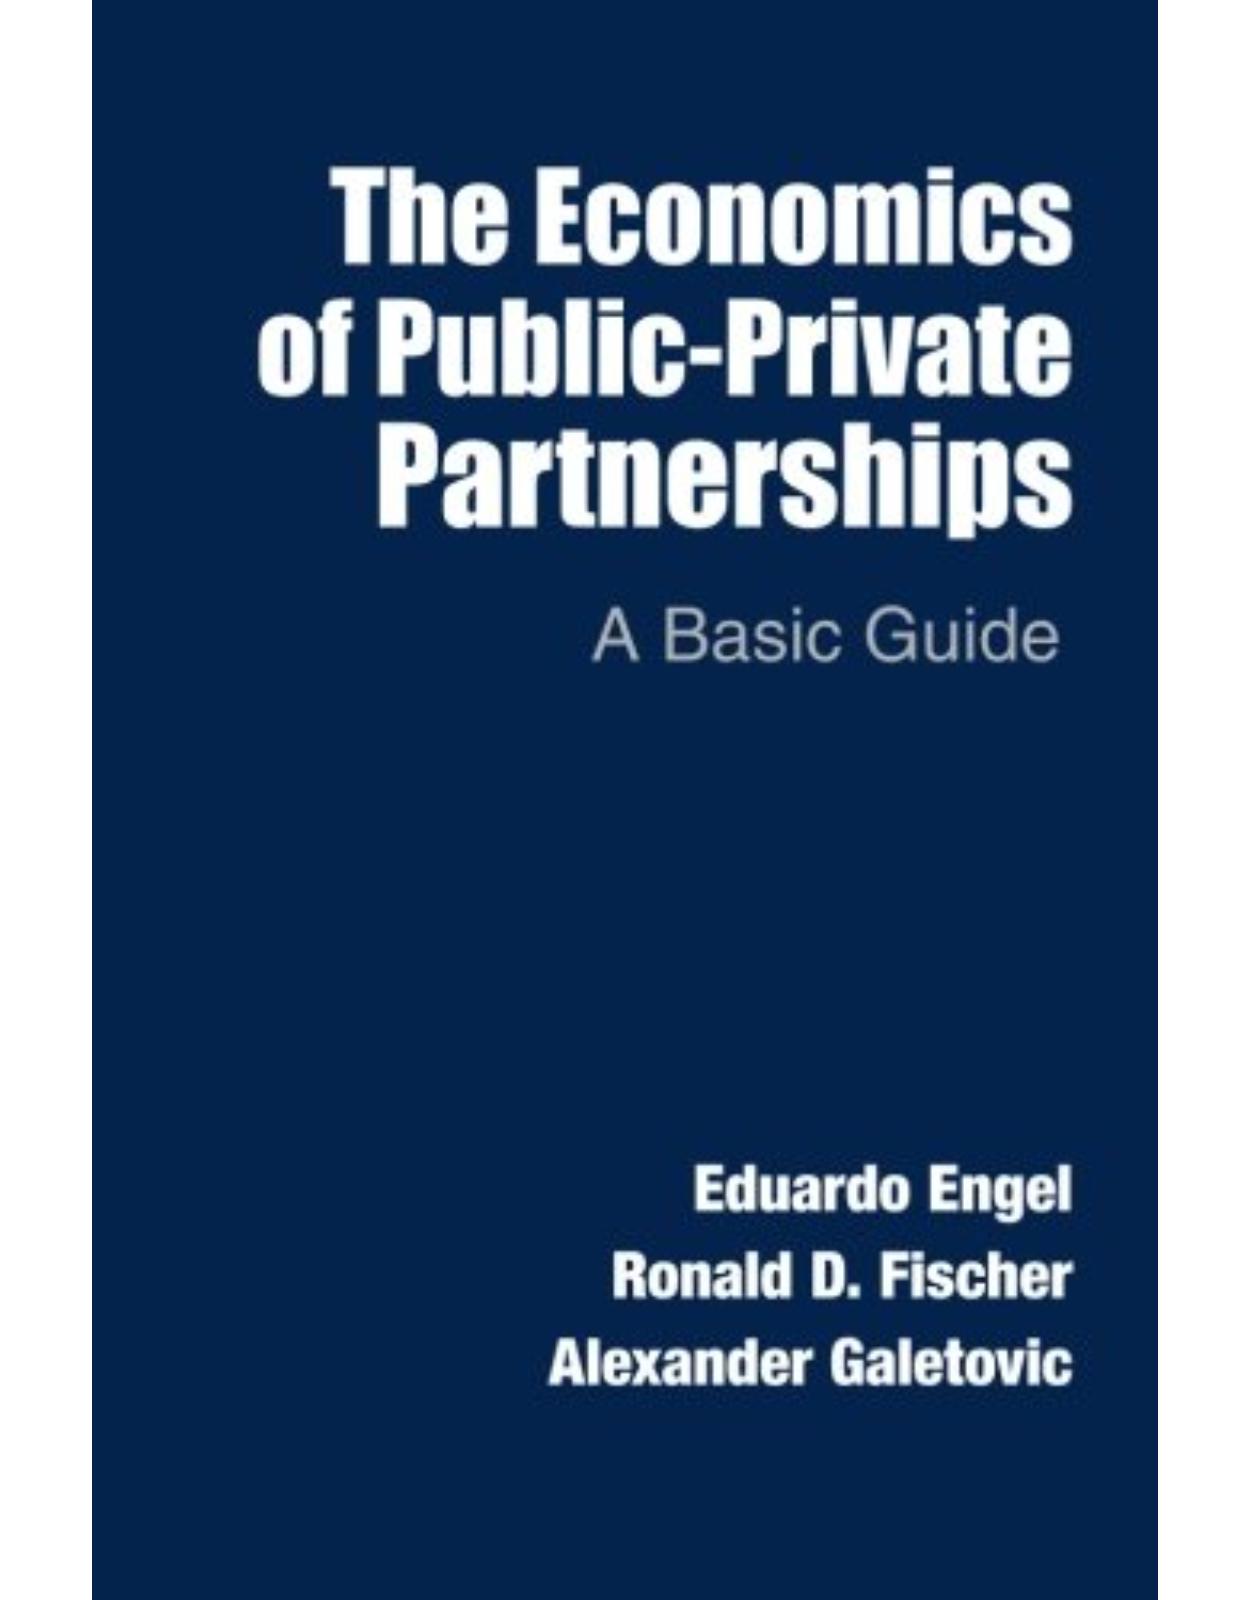 The Economics of Public-Private Partnerships: A Basic Guide